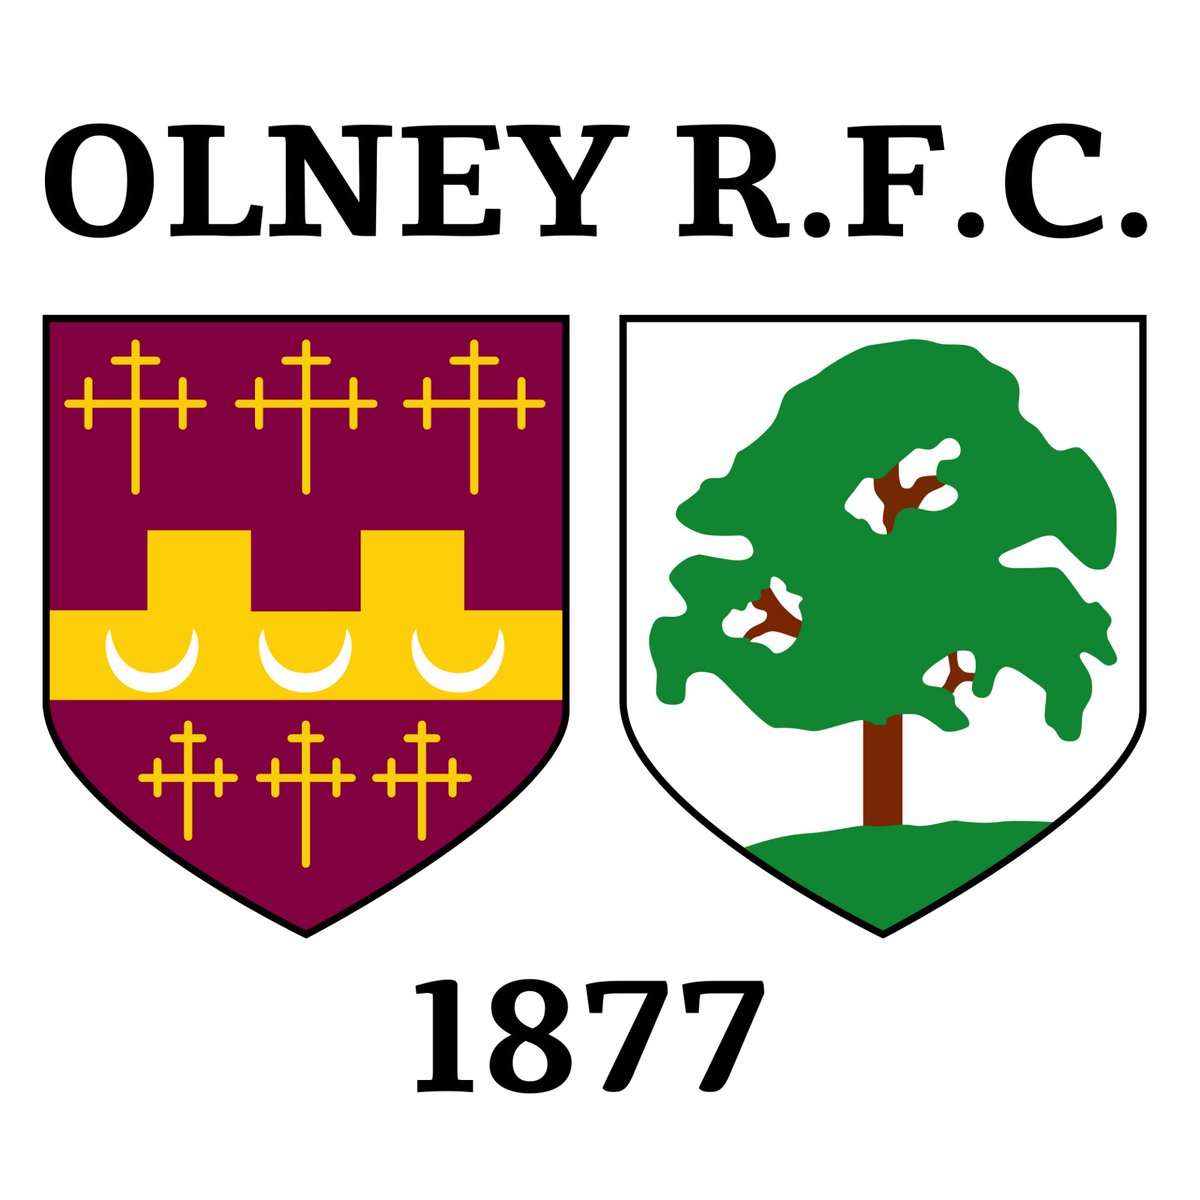 Last few shout outs for MK Can! Huge thank you to @olneyrfc for joining MK Can, our World Record attempt in October! Come along and support this huge community effort happening right here in Milton Keynes, head to our website for more info: buff.ly/3J4MMhL #mkcan